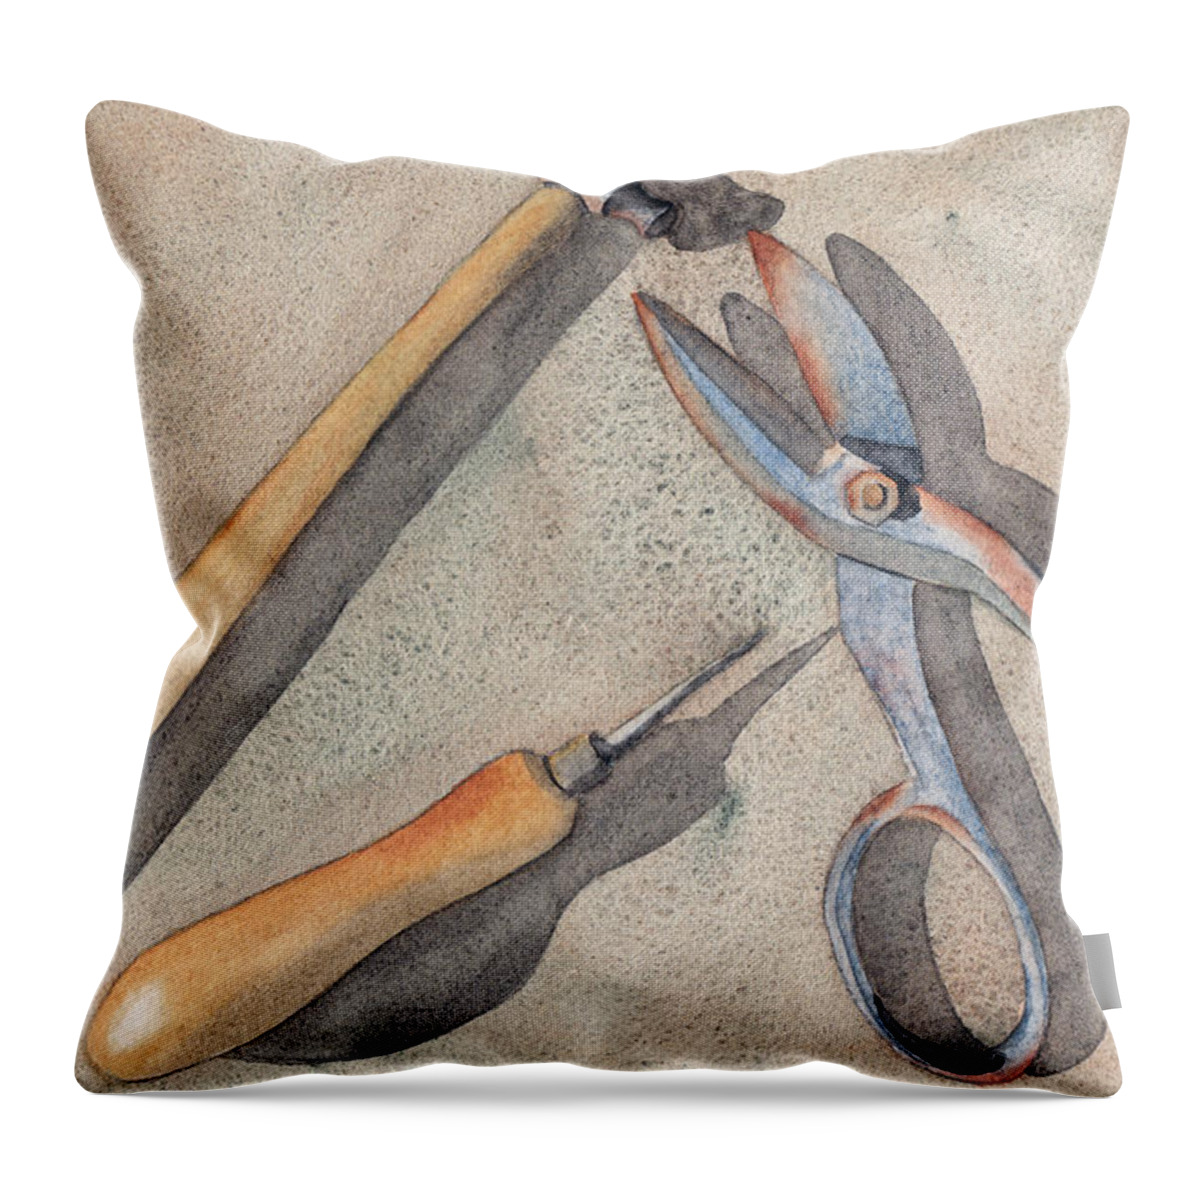 Assorted Throw Pillow featuring the painting Assorted Tools by Ken Powers